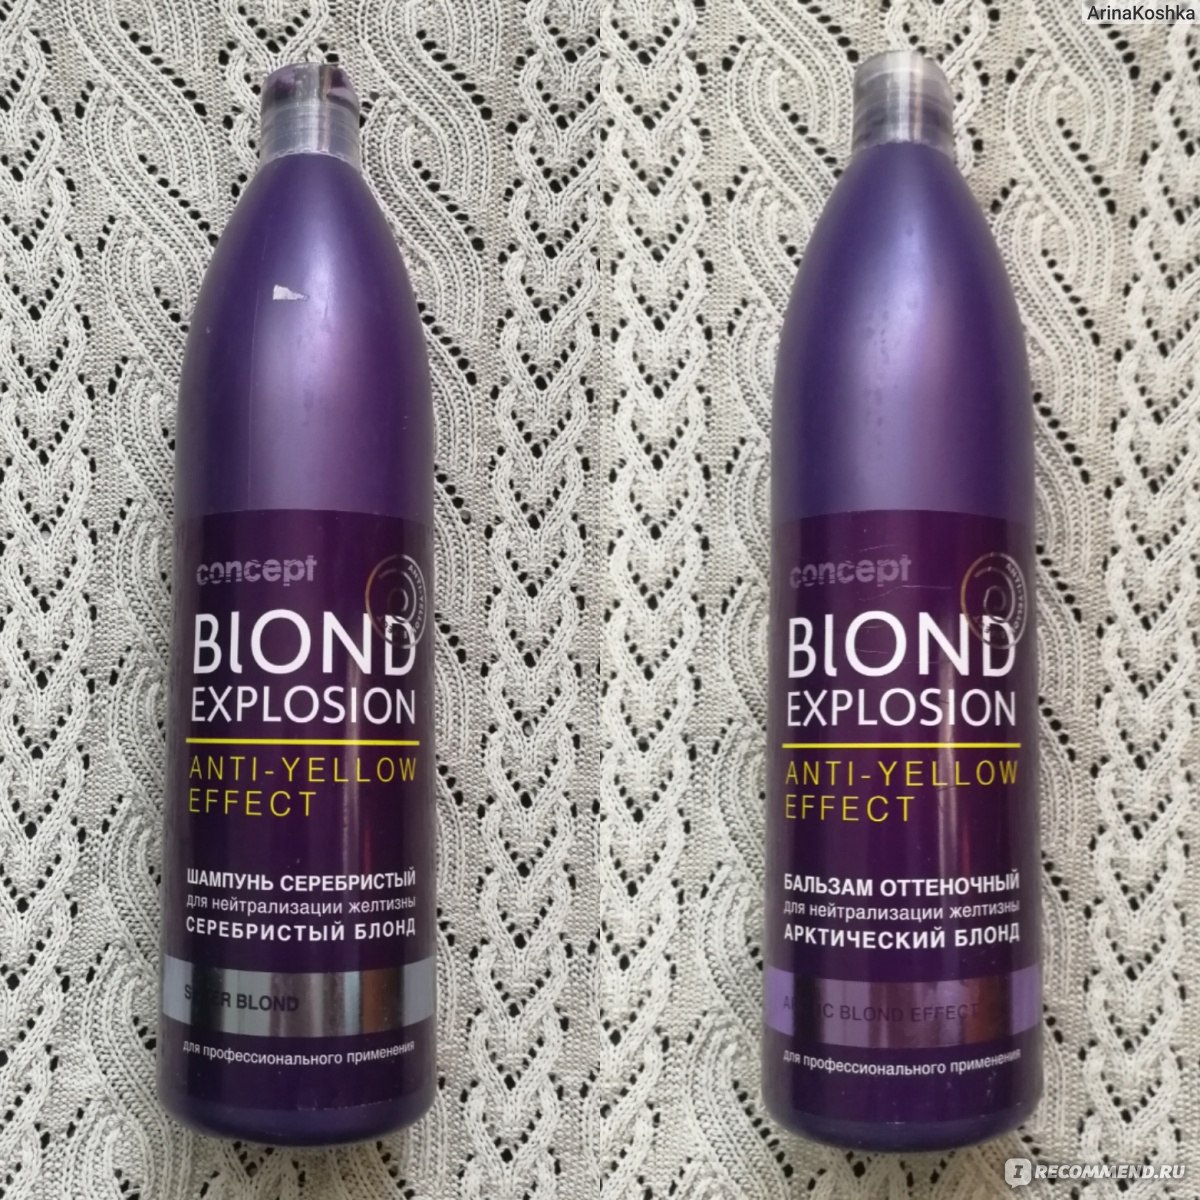 Concept Blond Explosion anti-yellow effect 